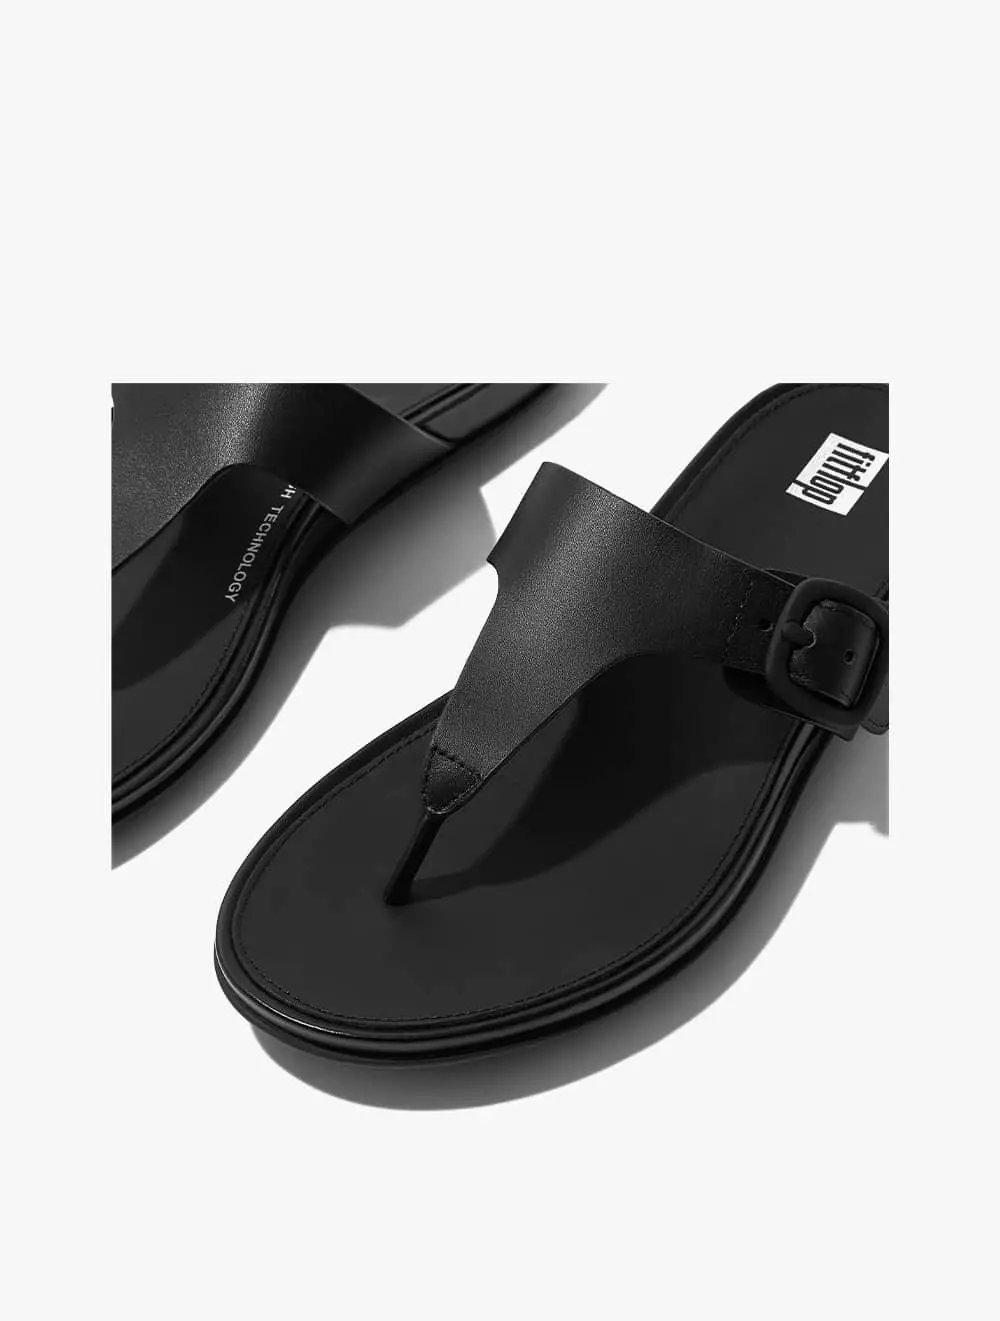 Jual FitFlop Fitflop Gracie Rubber-Buckle Leather Toe-Post Sandals ...